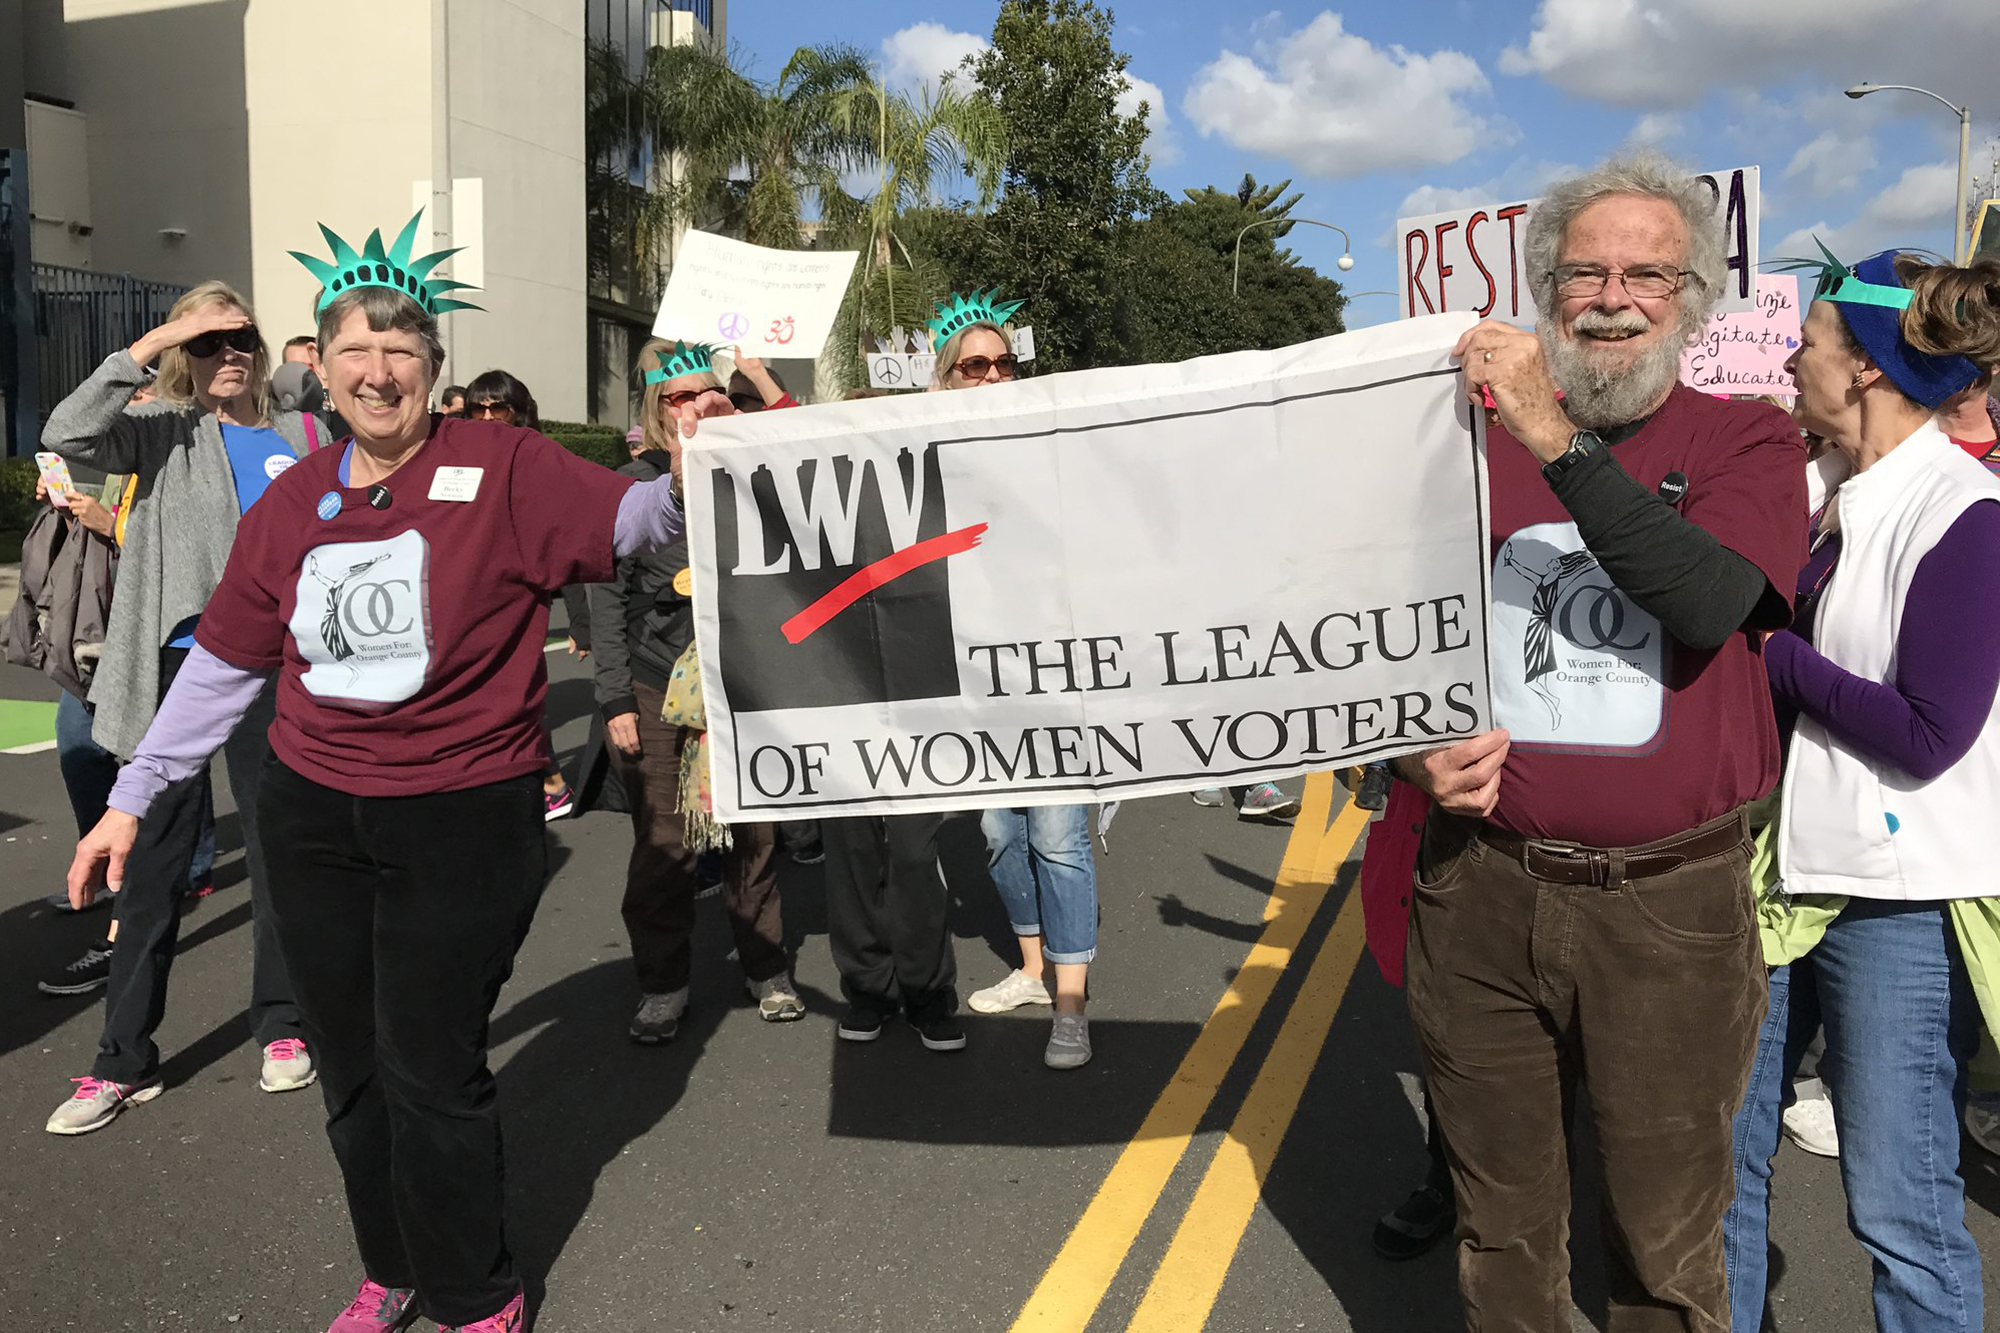 League of Women Voters supporters, marching.